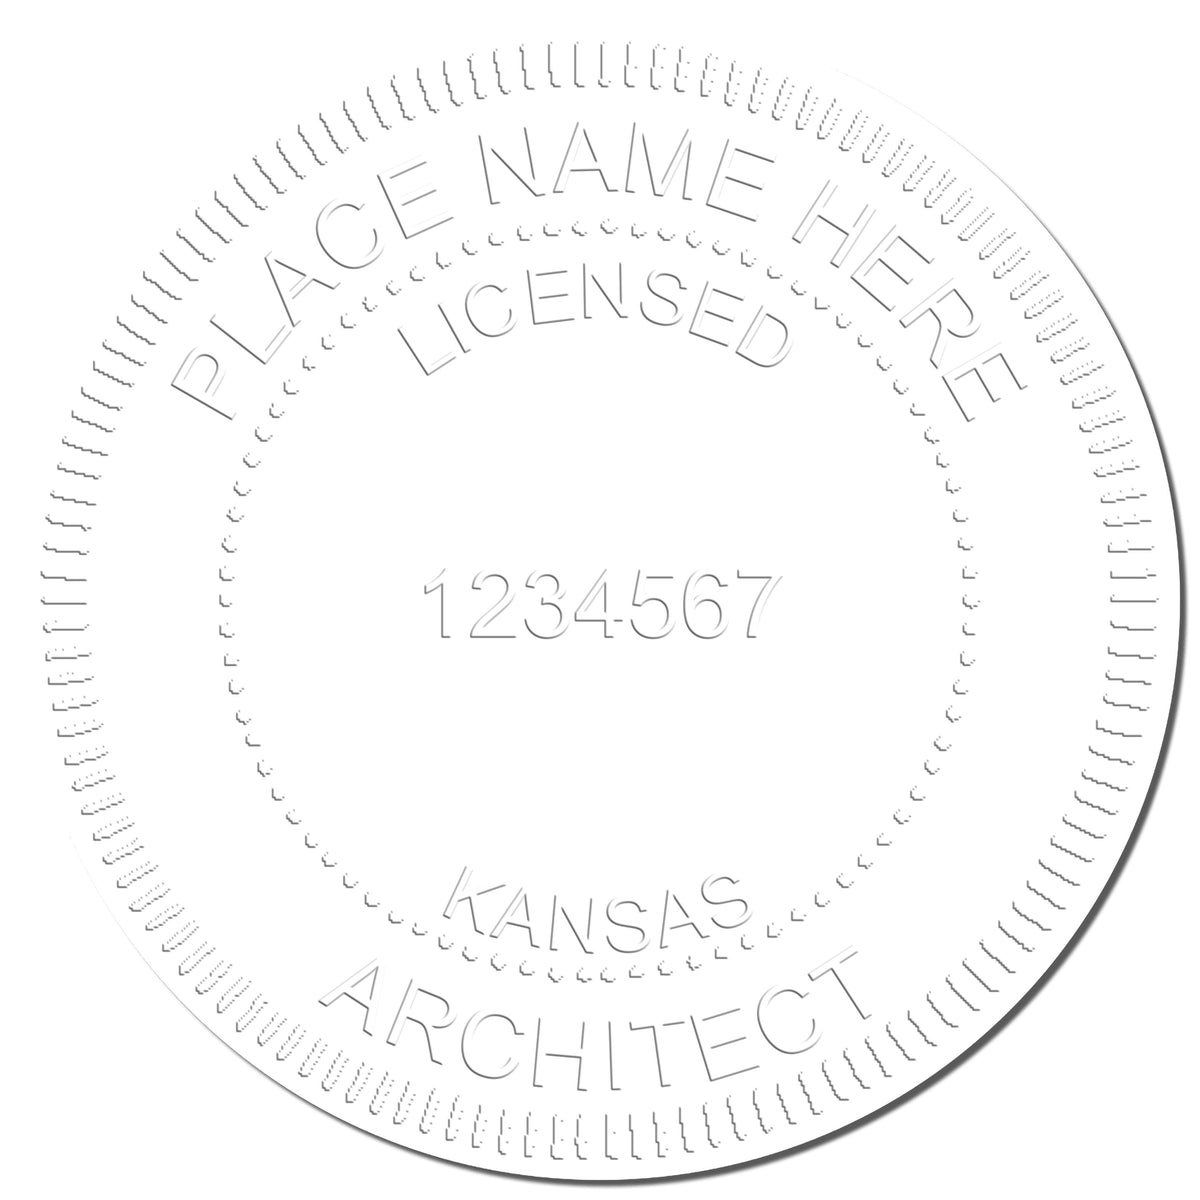 This paper is stamped with a sample imprint of the Hybrid Kansas Architect Seal, signifying its quality and reliability.